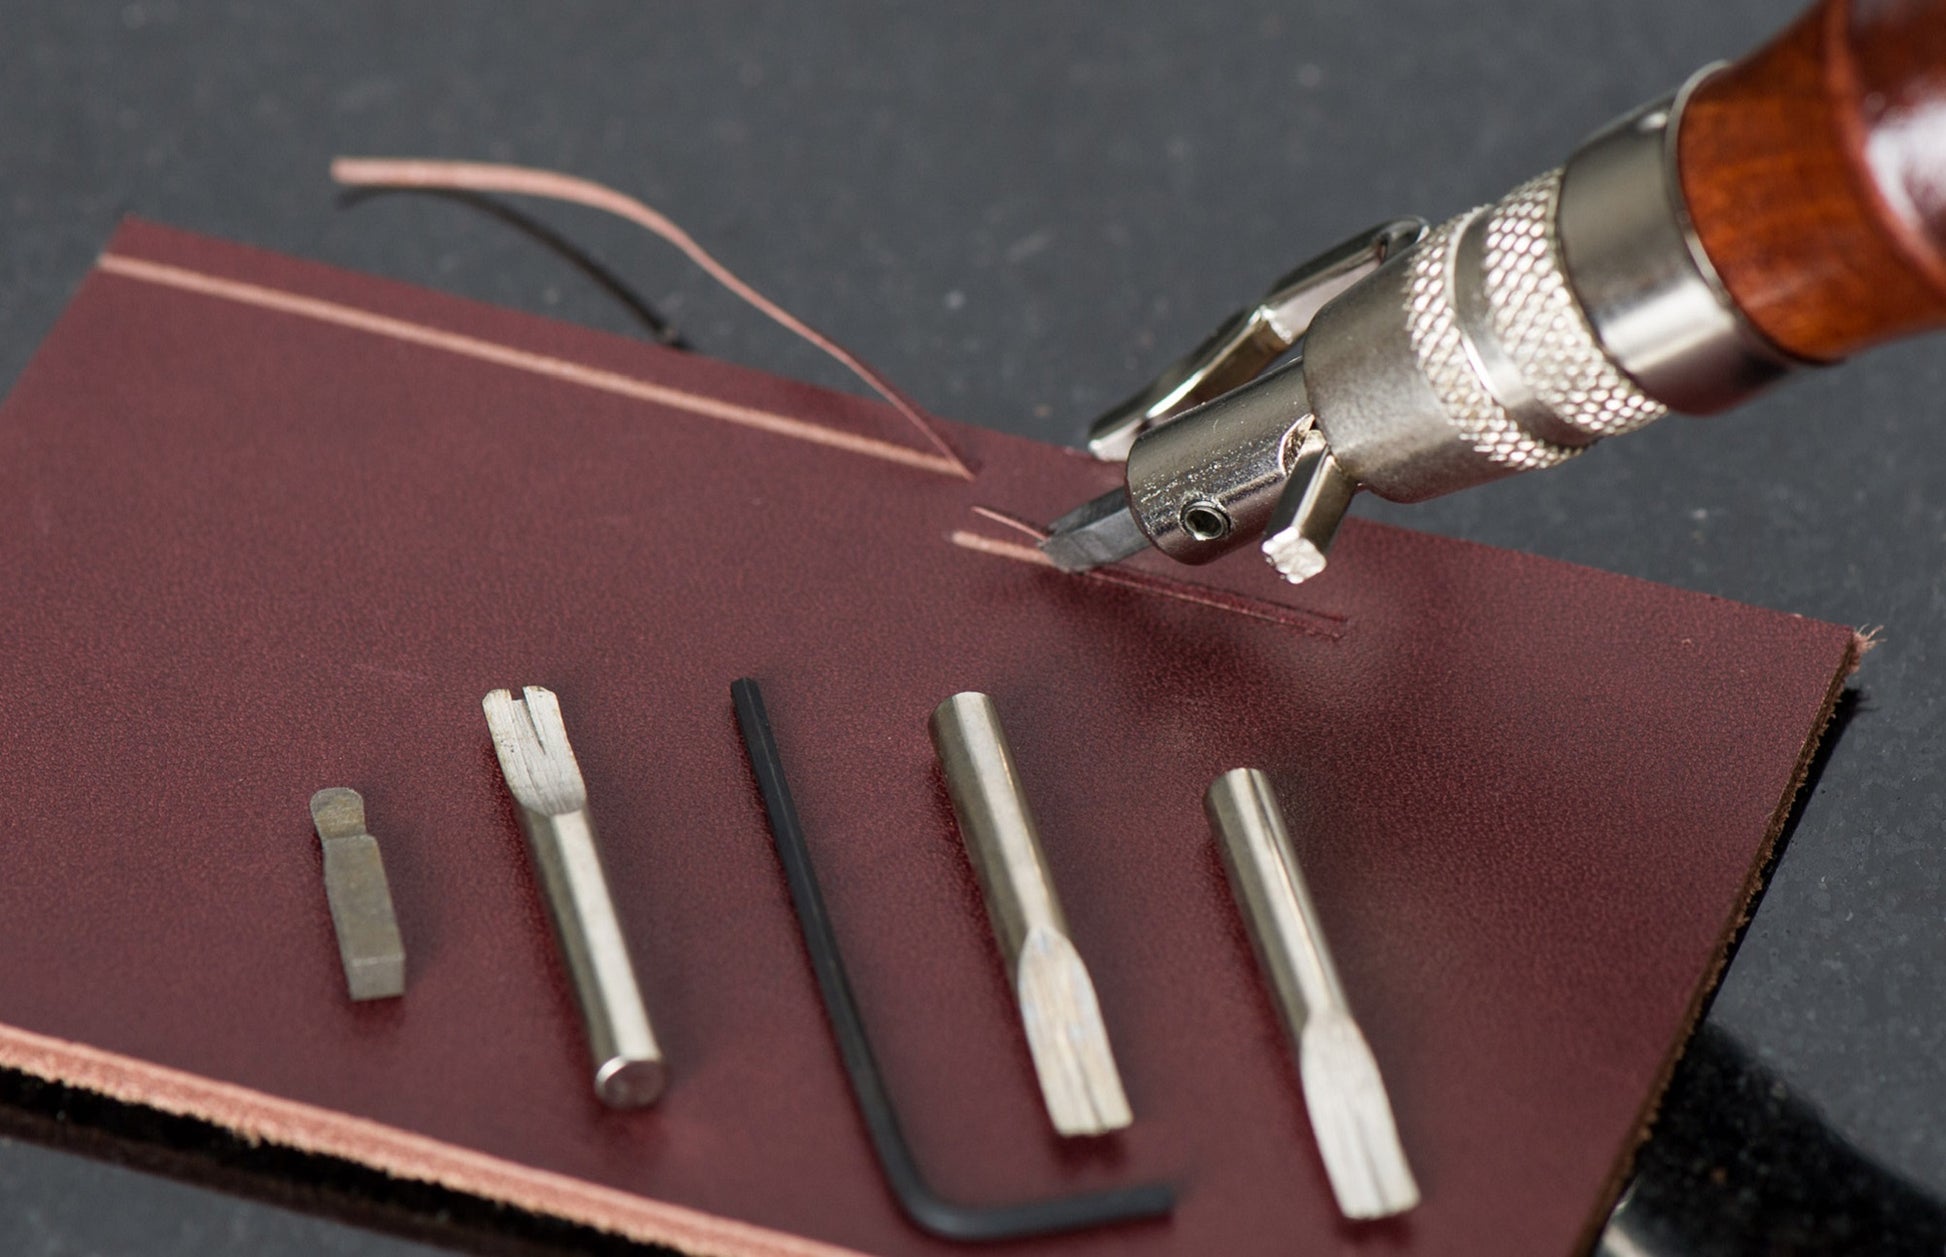 5 LEATHER CRAFT TOOLS FOR CUTTING - 5 TOOL TUESDAY 